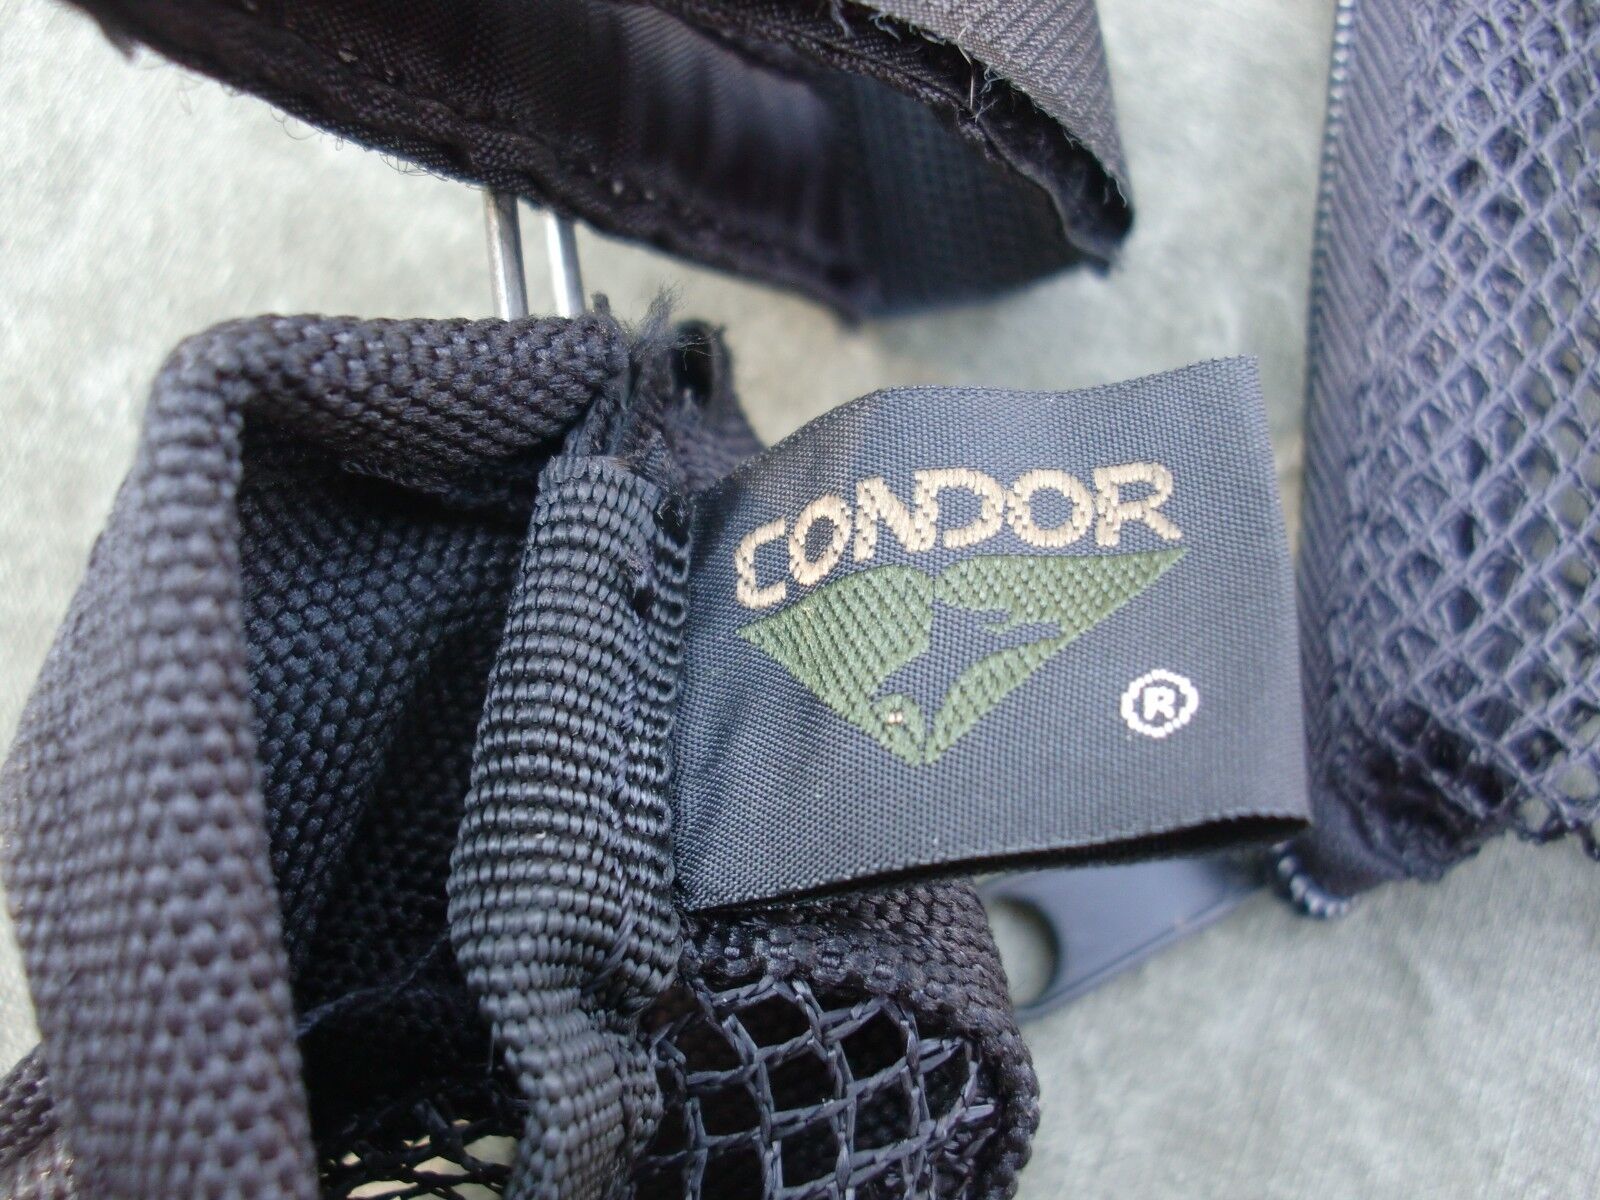 Condor 205 5.56mm Brass Catcher Mesh Tactical Pouch  - New with tag